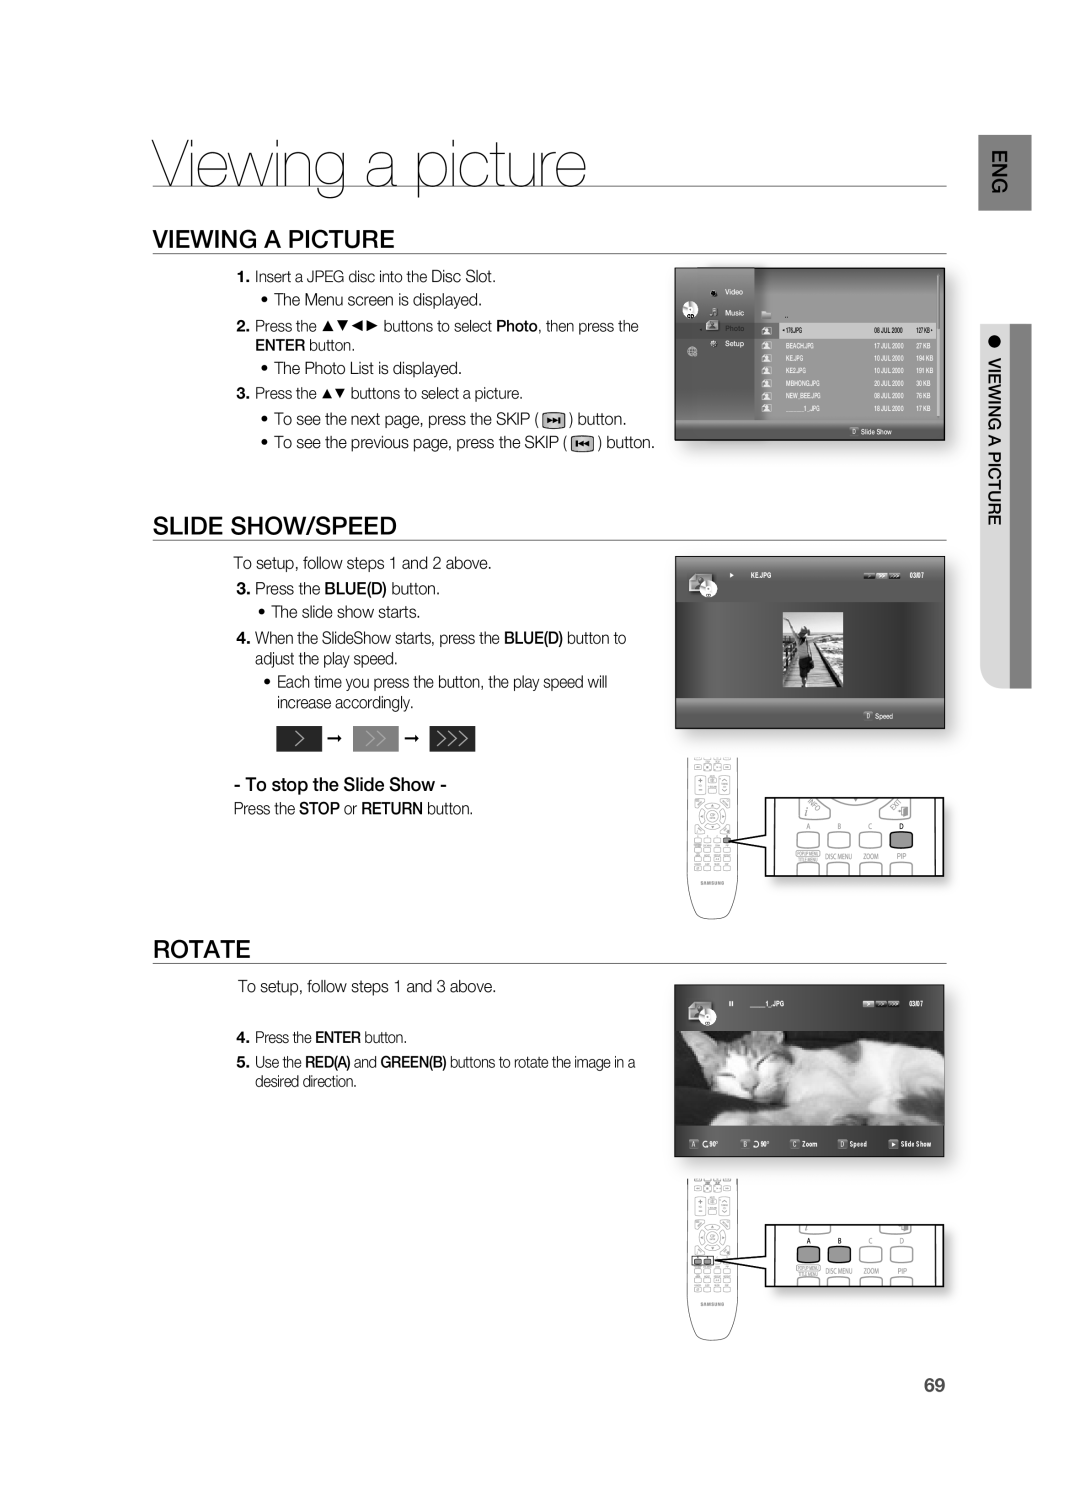 Samsung HT-BD8200 user manual Viewing a picture, Viewing A Picture, Slide Show/Speed, Rotate 